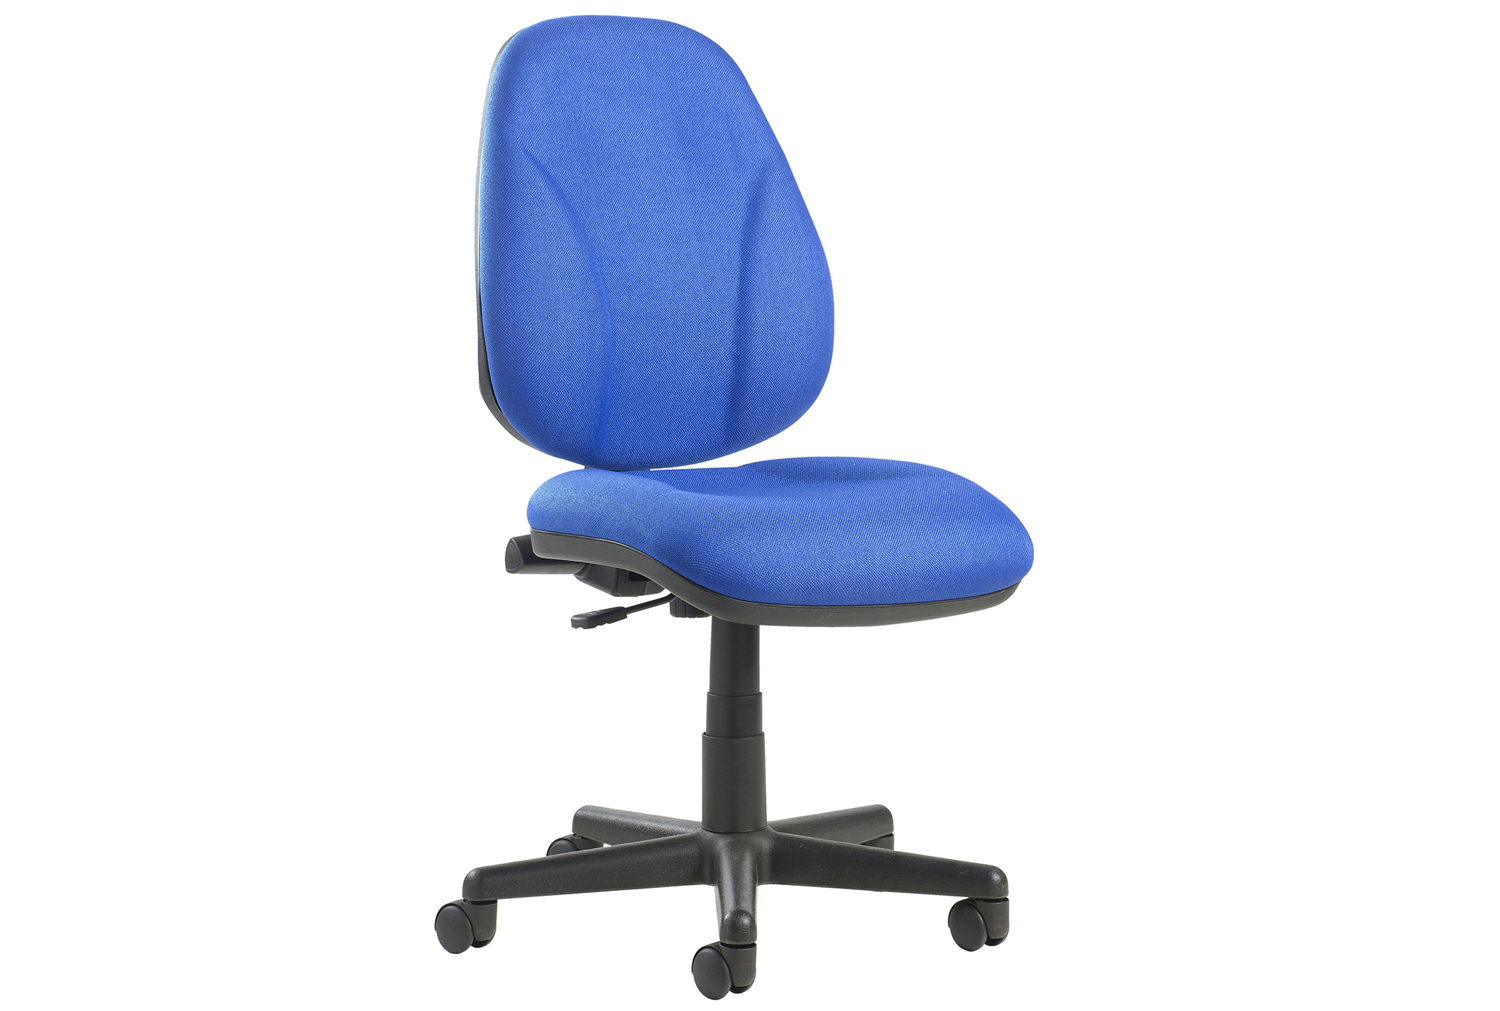 Full Lumbar 1 Lever Operator Office Chair No Arms, Blue, Fully Installed